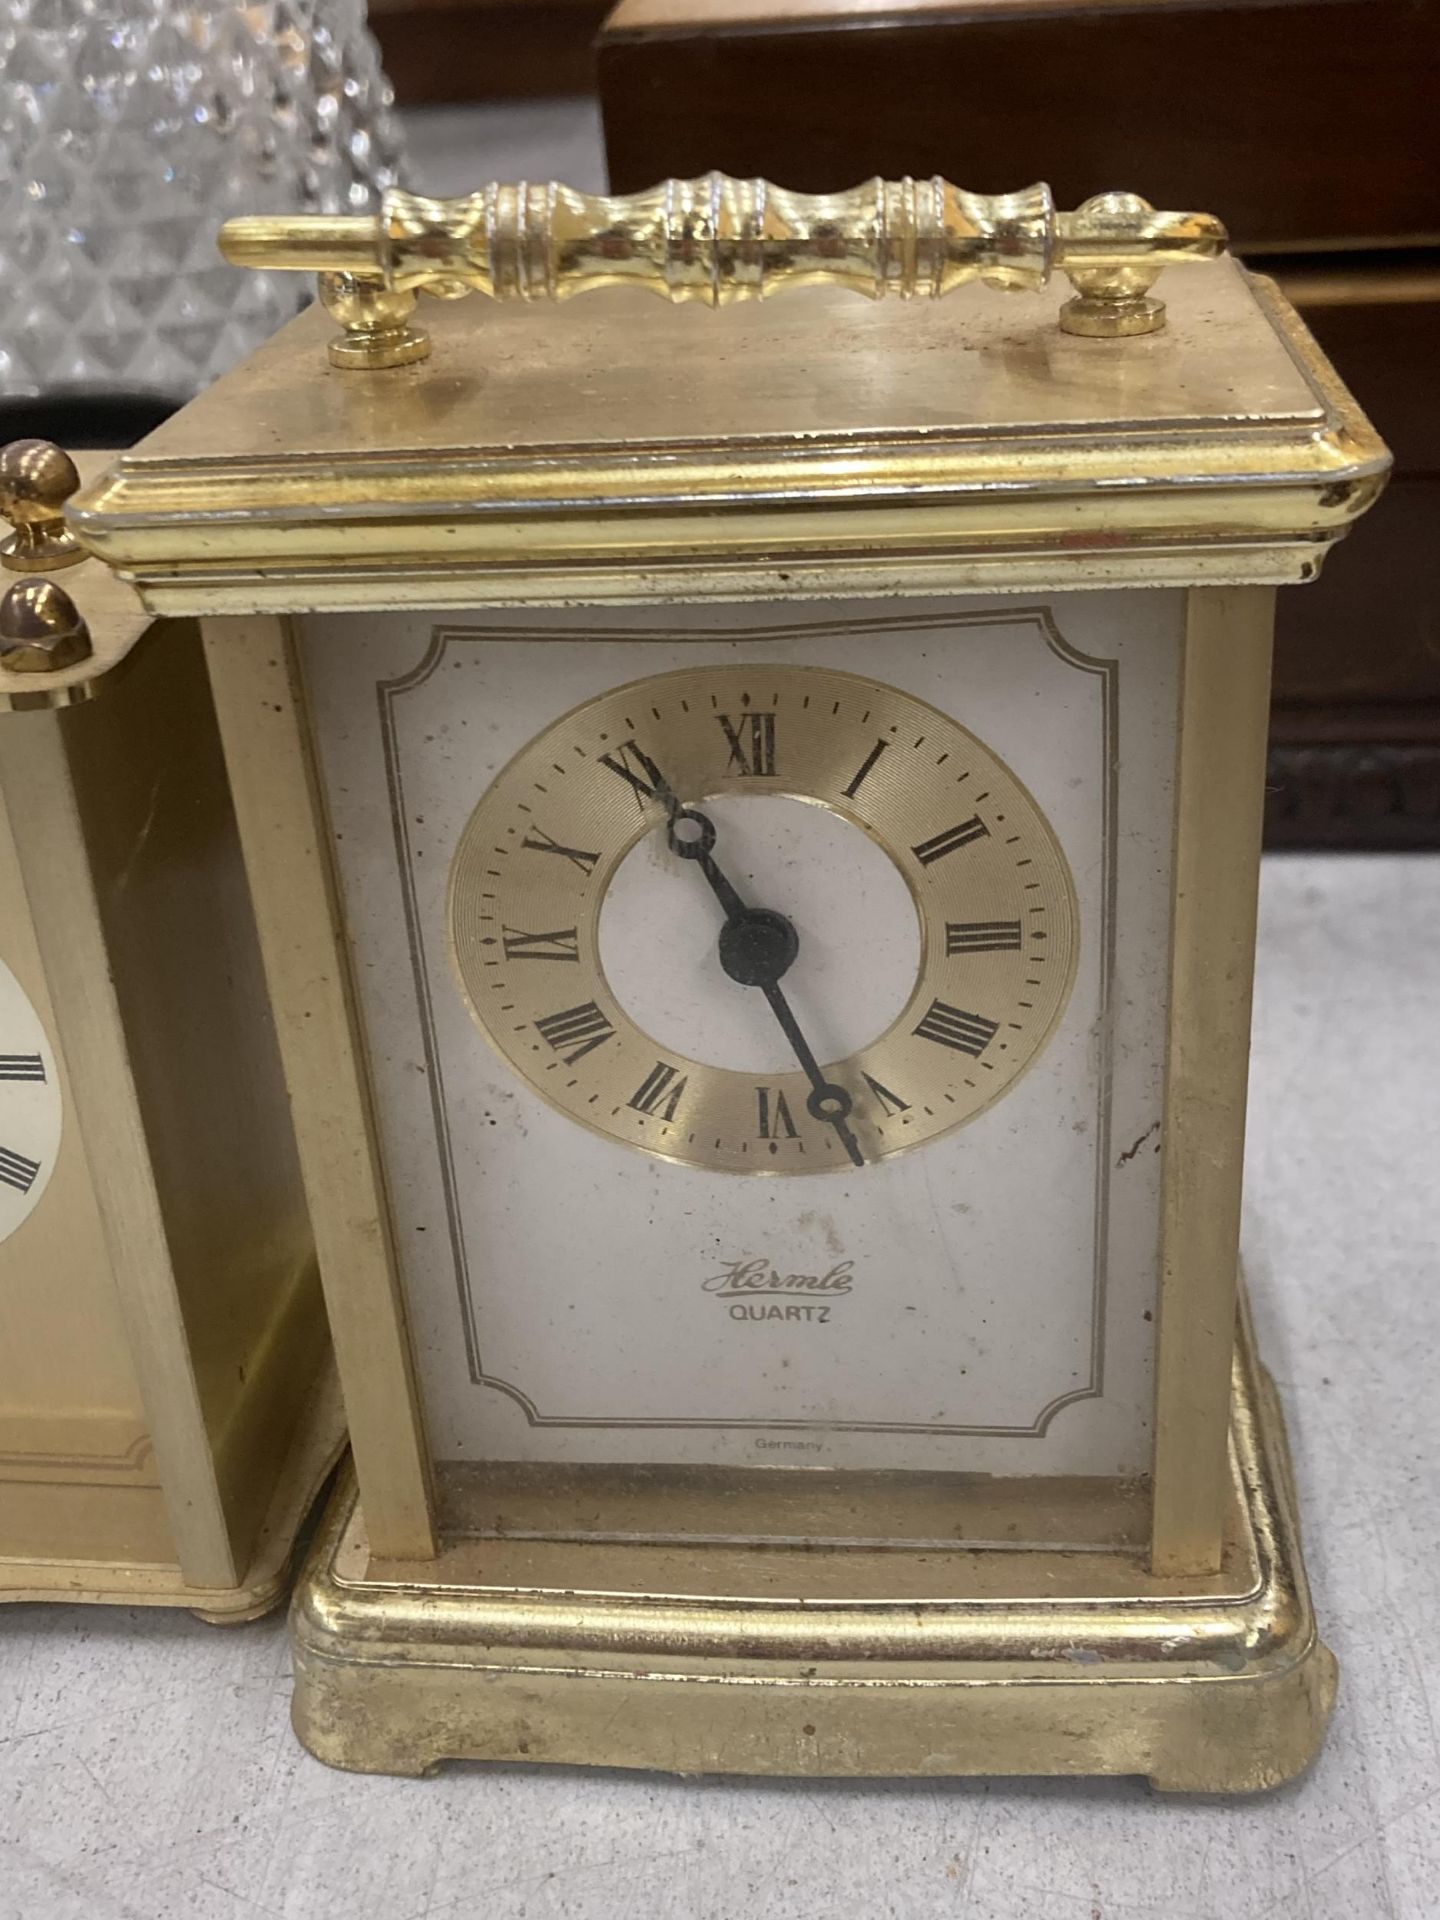 THREE BRASS CLOCKS TO INCLUDE W. WIDDUP, STAIGER AND HERMLE - Image 3 of 4